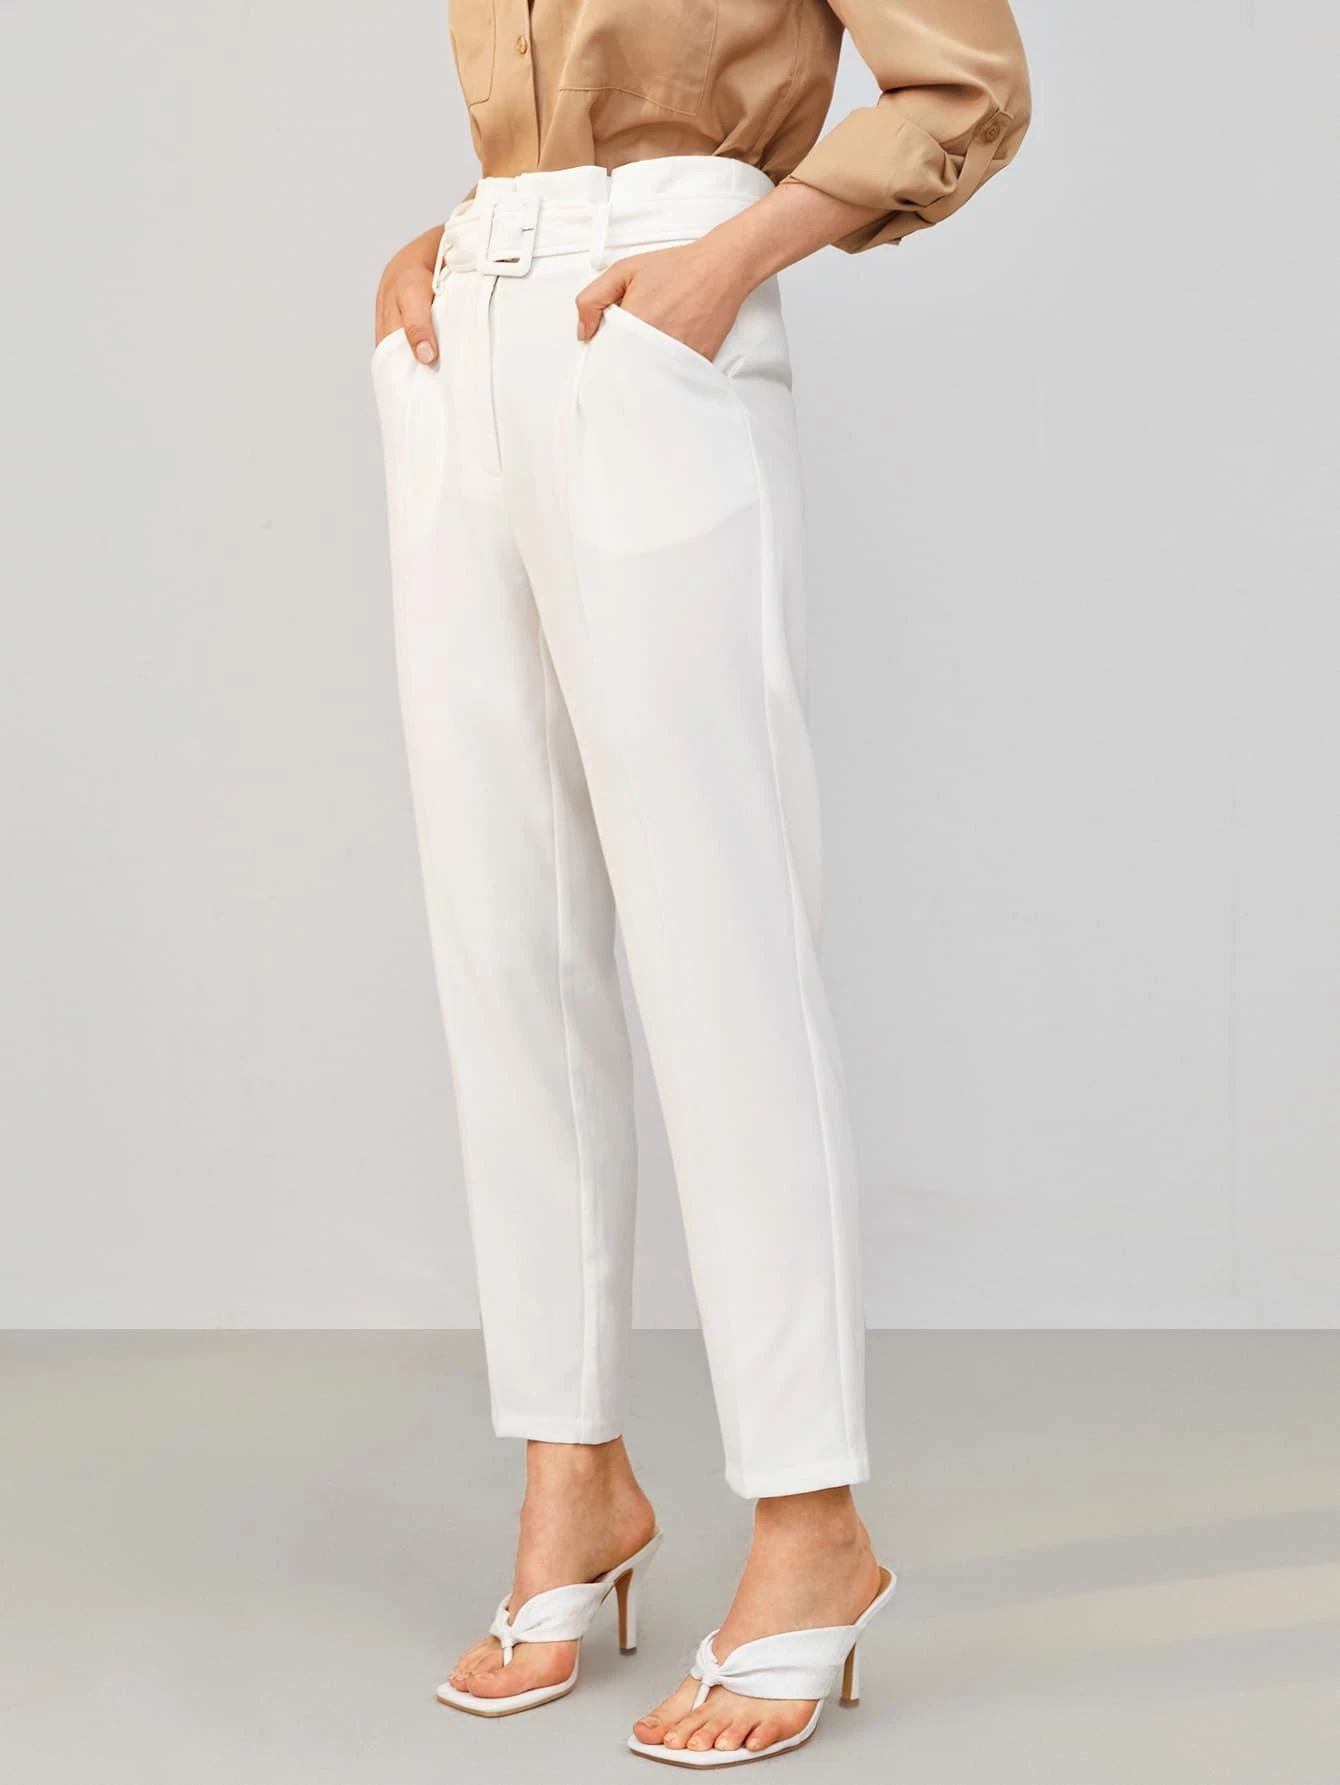 SHEIN Buckle Belted Solid Tailored Pants | SHEIN